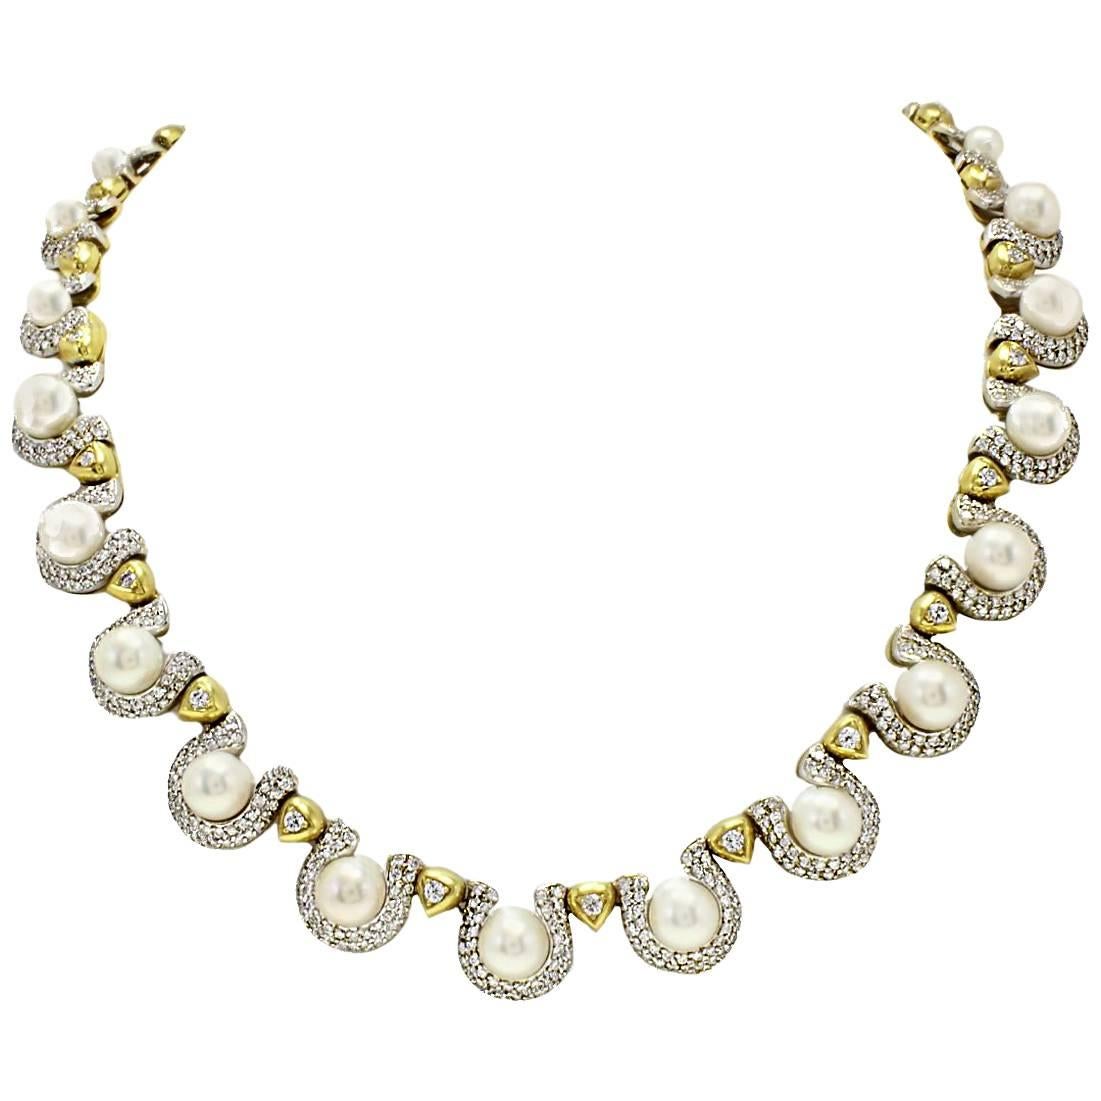  Pearl 11, 50 ct Diamond 18 kt Gold Necklace For Sale